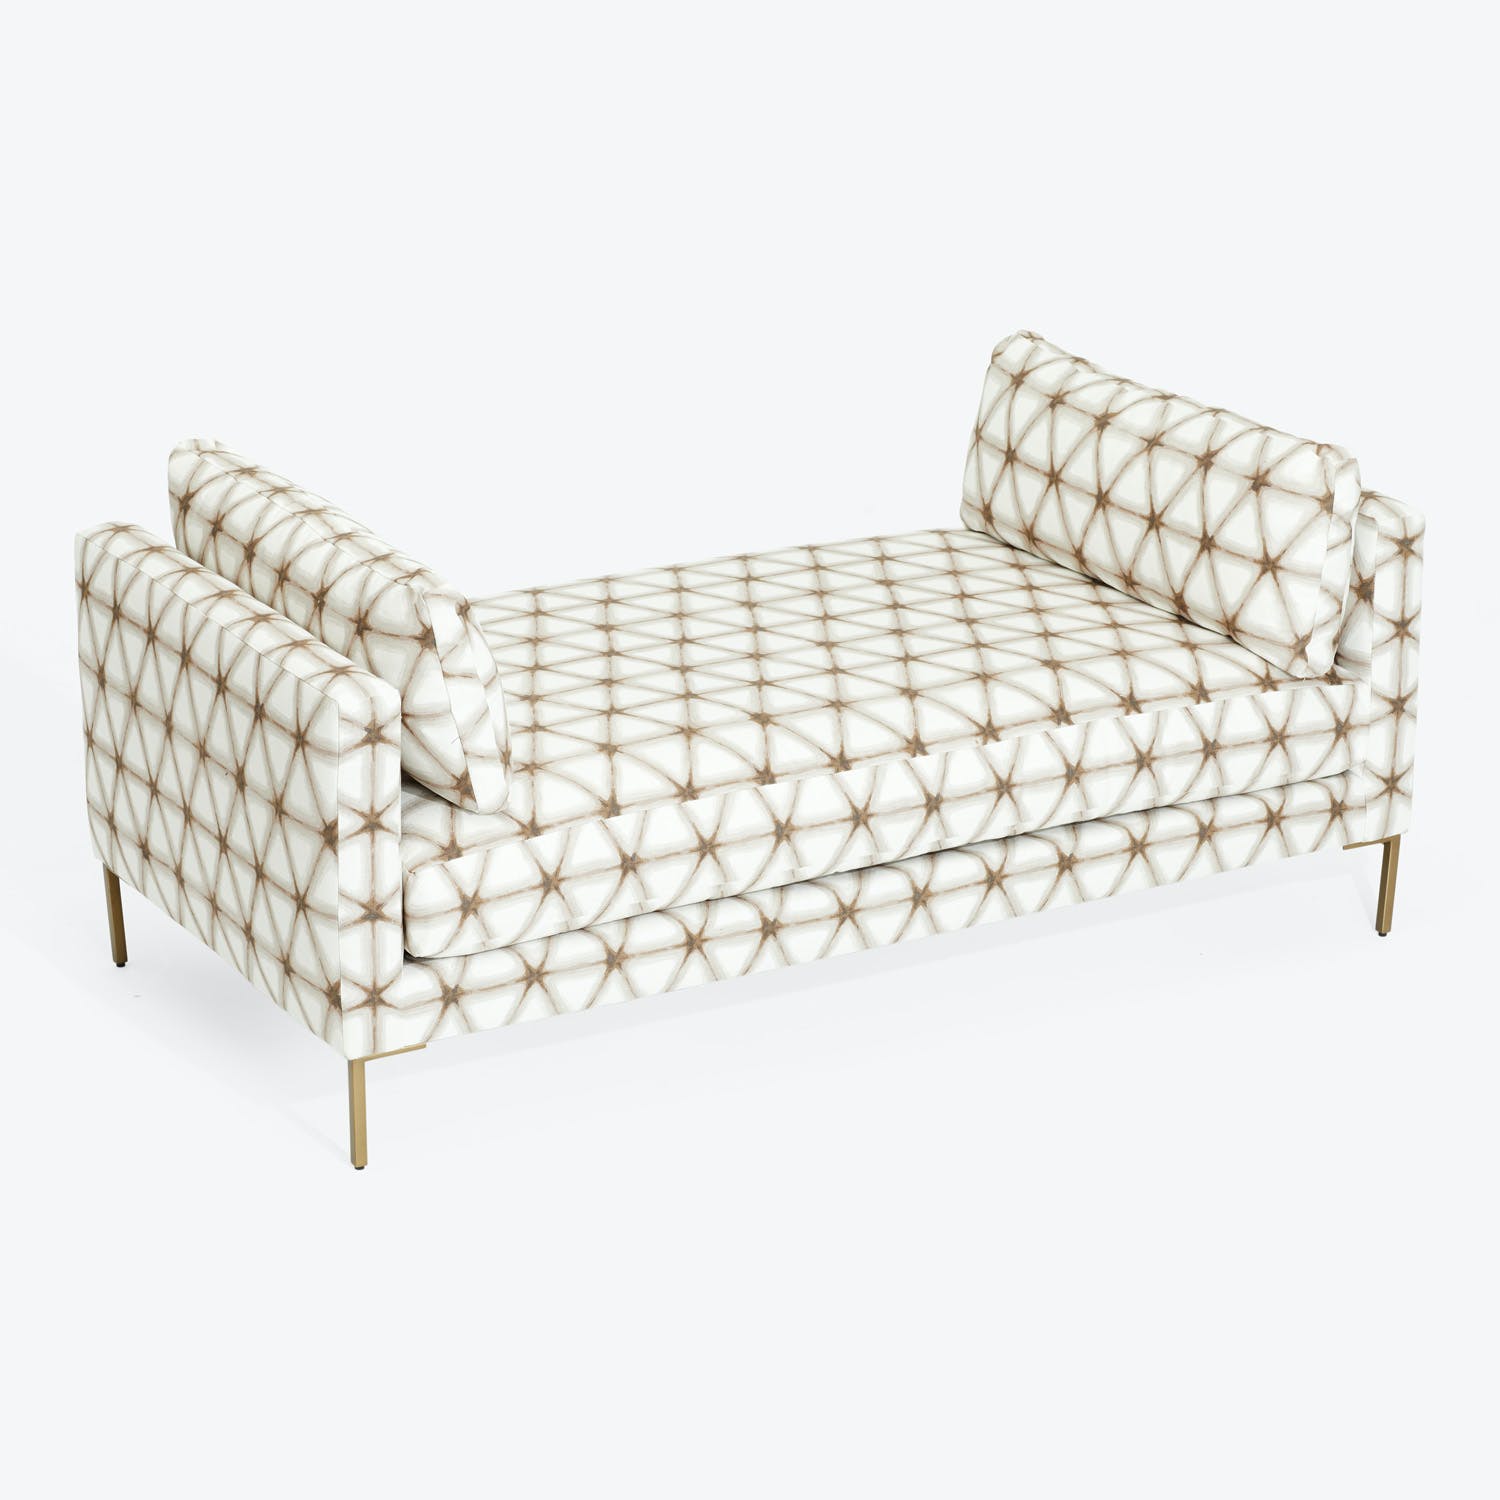 Modern two-seater sofa with geometric pattern and elegant brass legs.